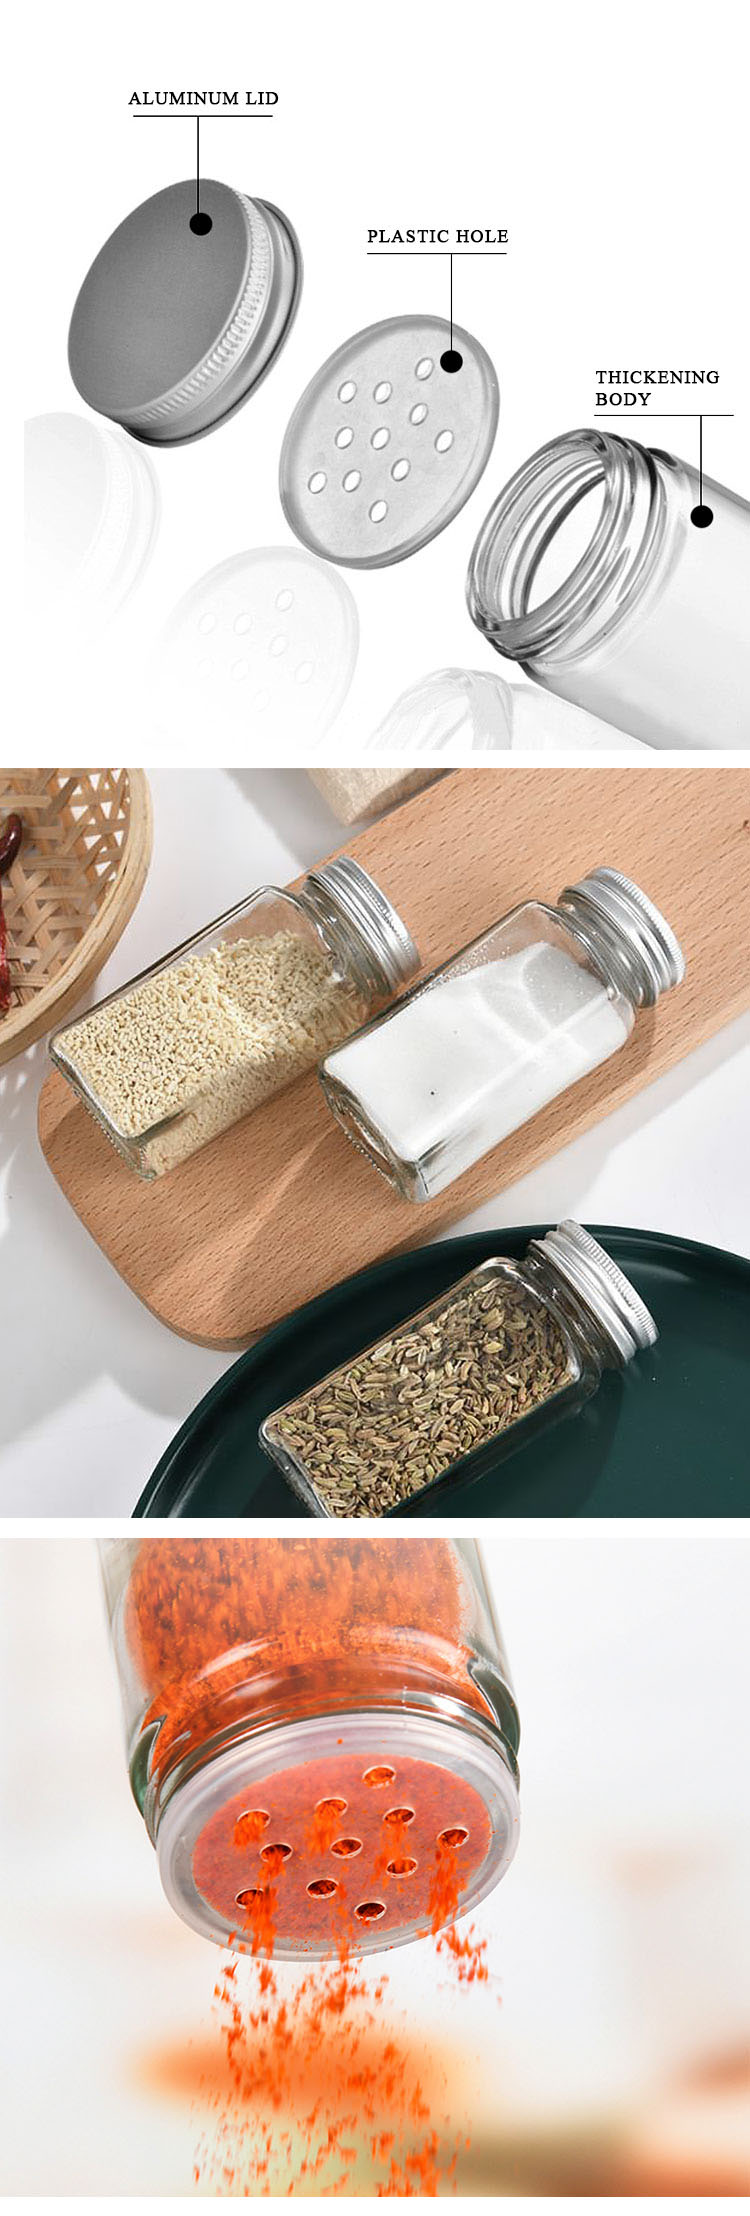 Square Glass Spice Jars With Shaker